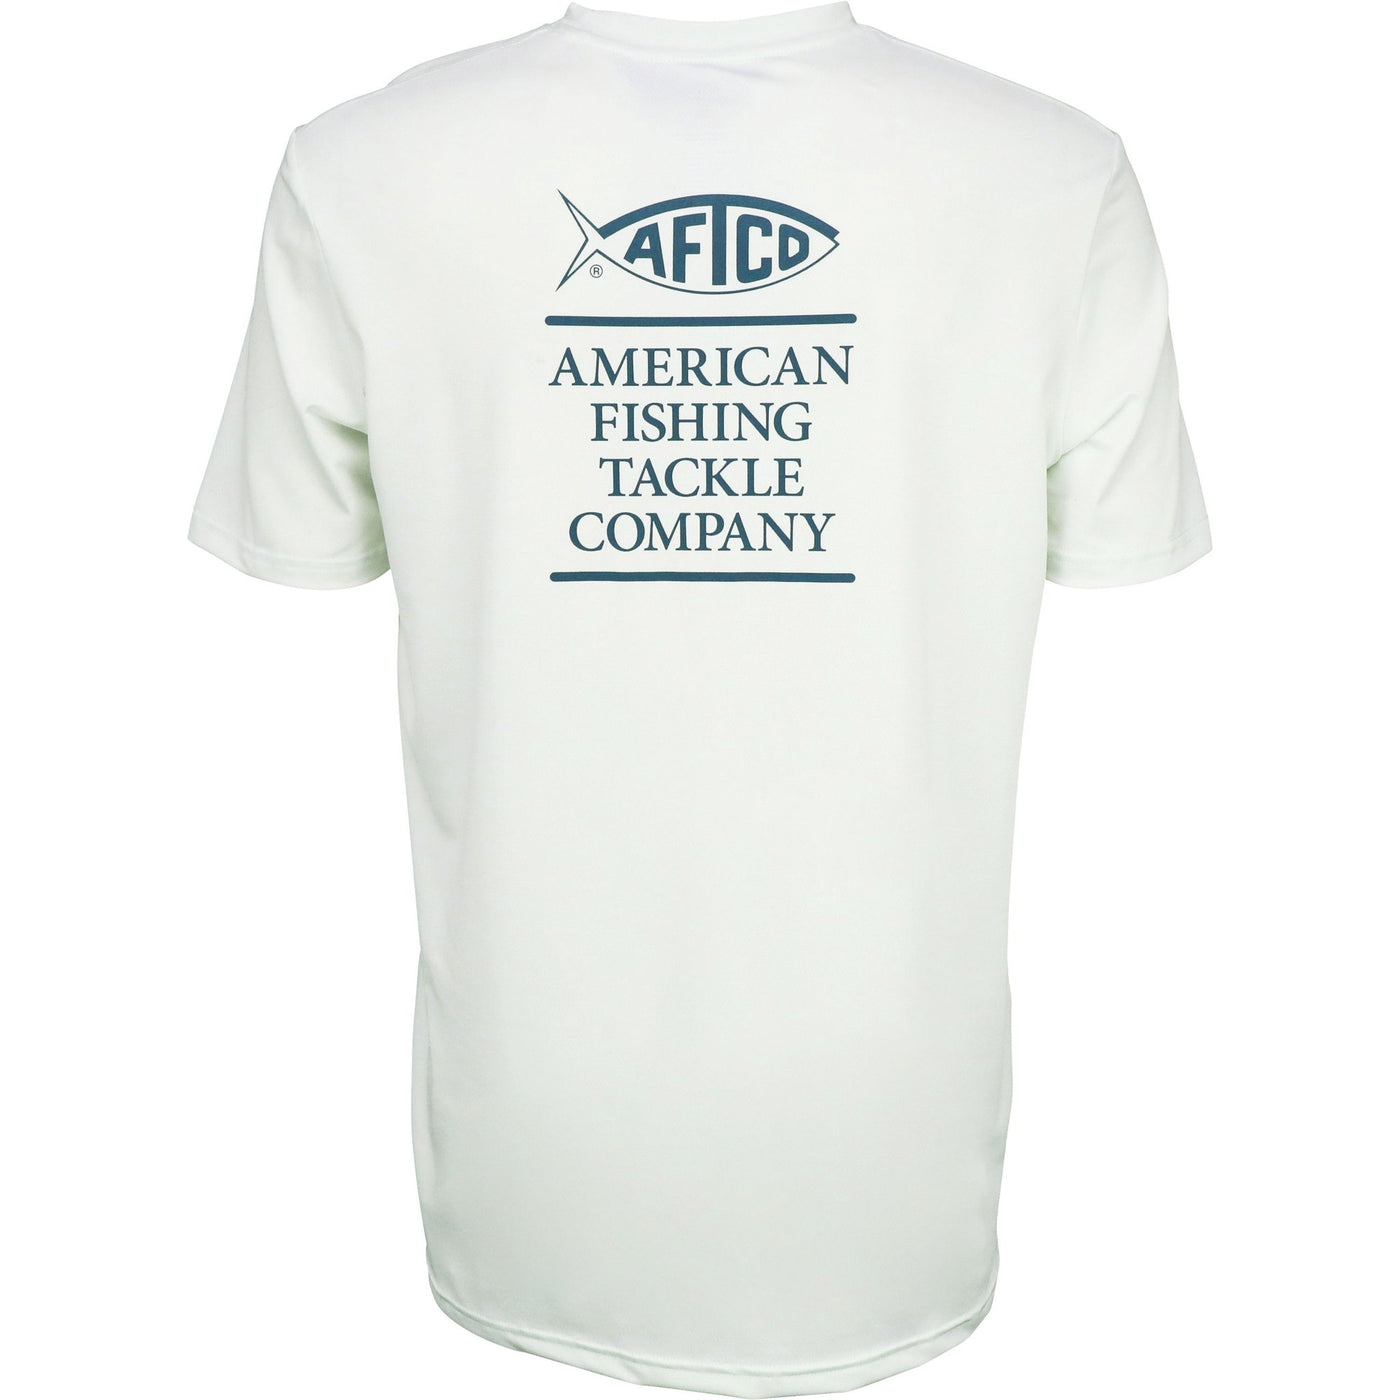 Aftco Stax Airomesh Short Sleeve Performance Shirt-MENS CLOTHING-Vapor Heather-S-Kevin's Fine Outdoor Gear & Apparel